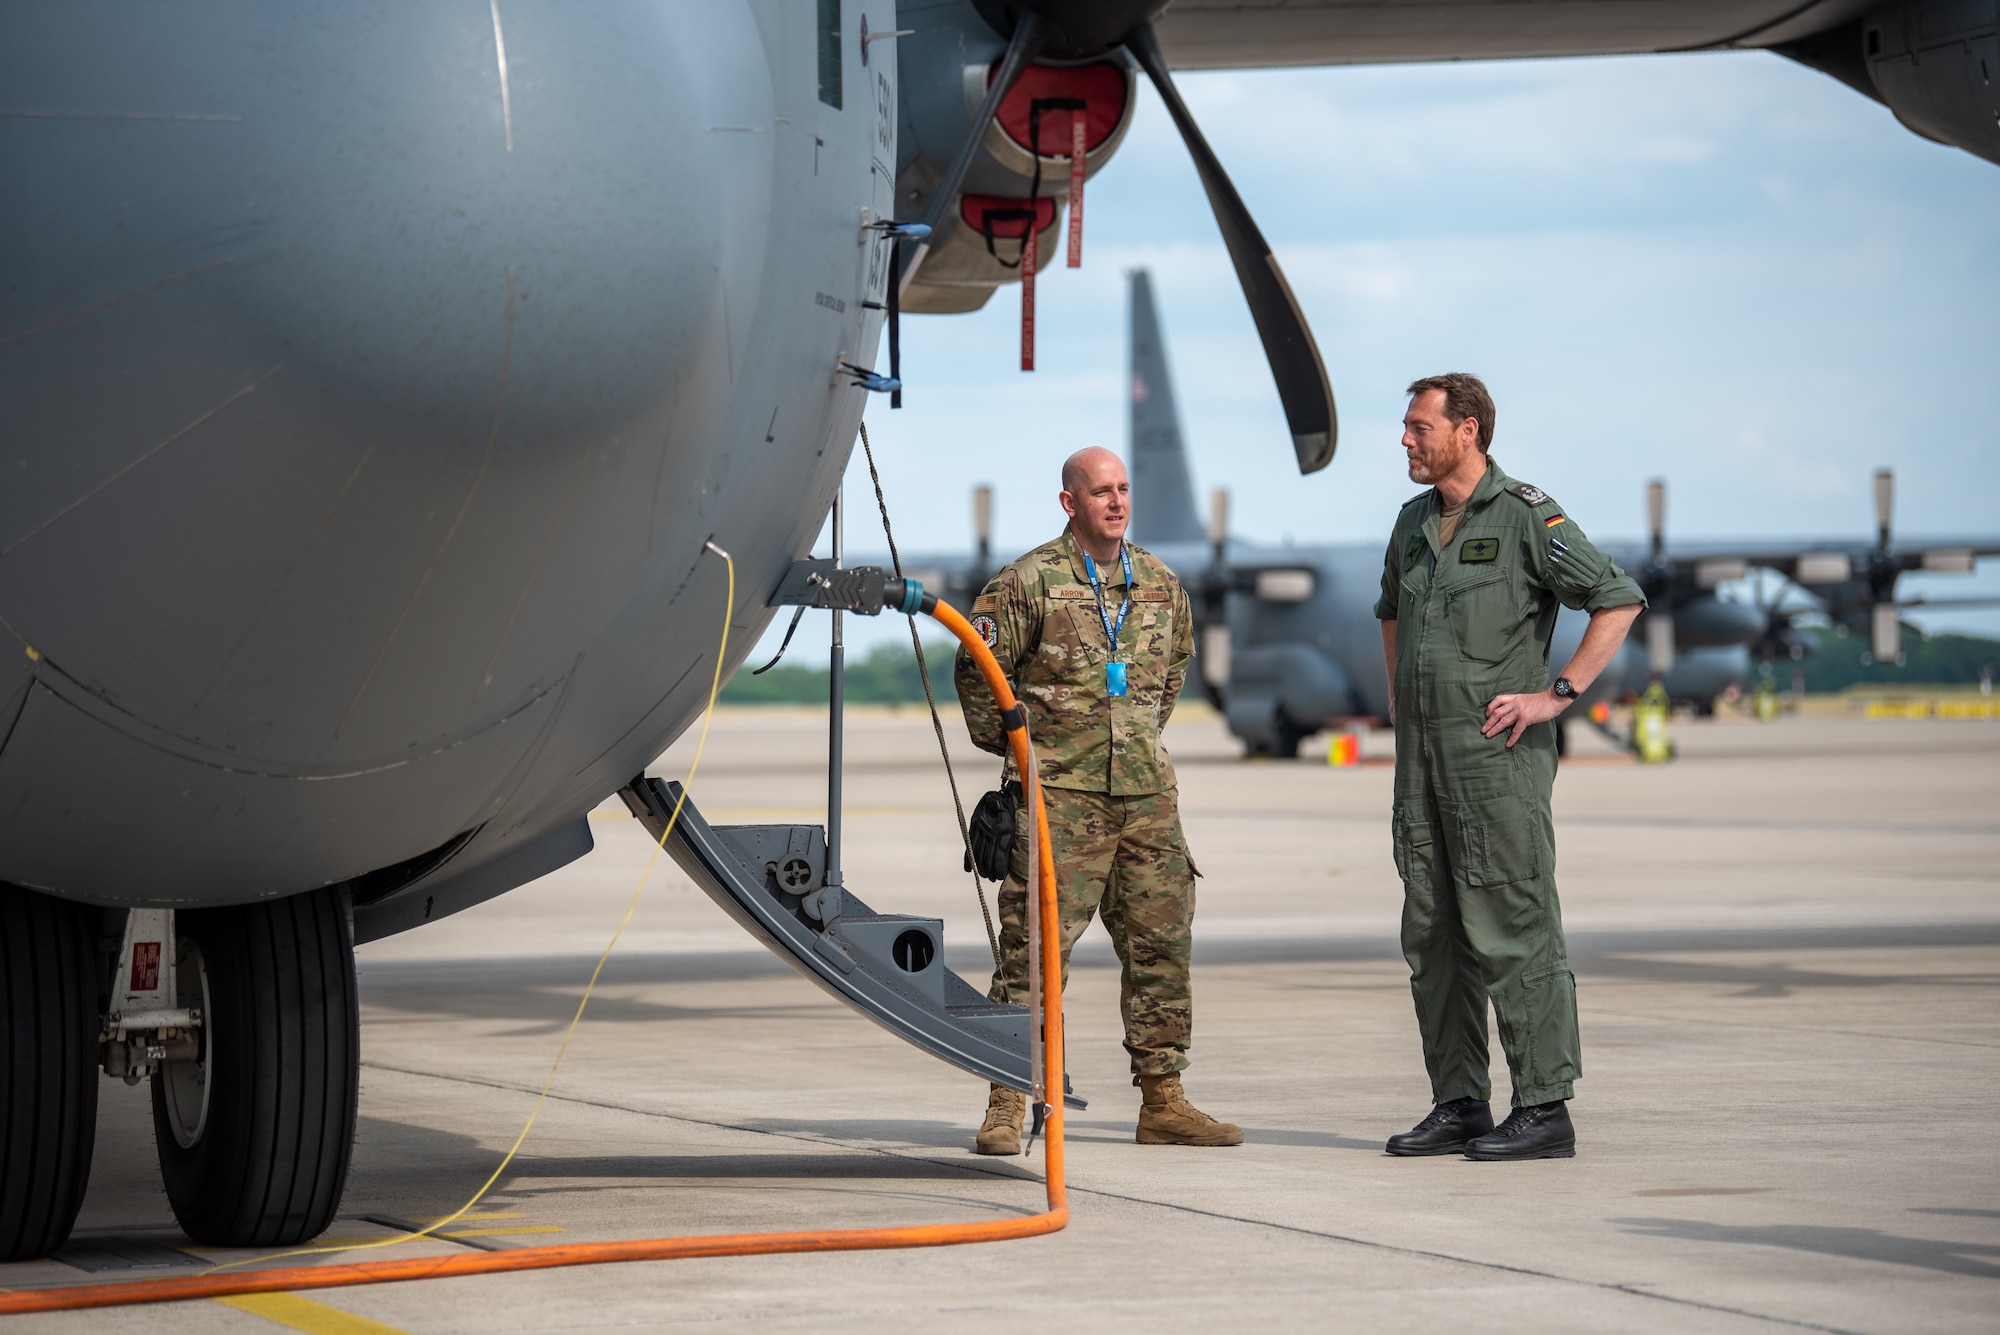 German Col. Christian John, right, commander of the German 62nd Air Transport Wing, speaks with U.S. Air Force Tech. Sgt. Johnny Arrow, a hydraulics technician assigned to the 136th Airlift Wing, Texas National Guard, during exercise Air Defender 2023 (AD23) at Wunstorf Air Base, Germany, June 15, 2023. Exercise AD23 integrates both U.S. and allied air-power to defend shared values, while leveraging and strengthening vital partnerships to deter aggression around the world. (U.S. Air National Guard photo by Master Sgt. Phil Speck)